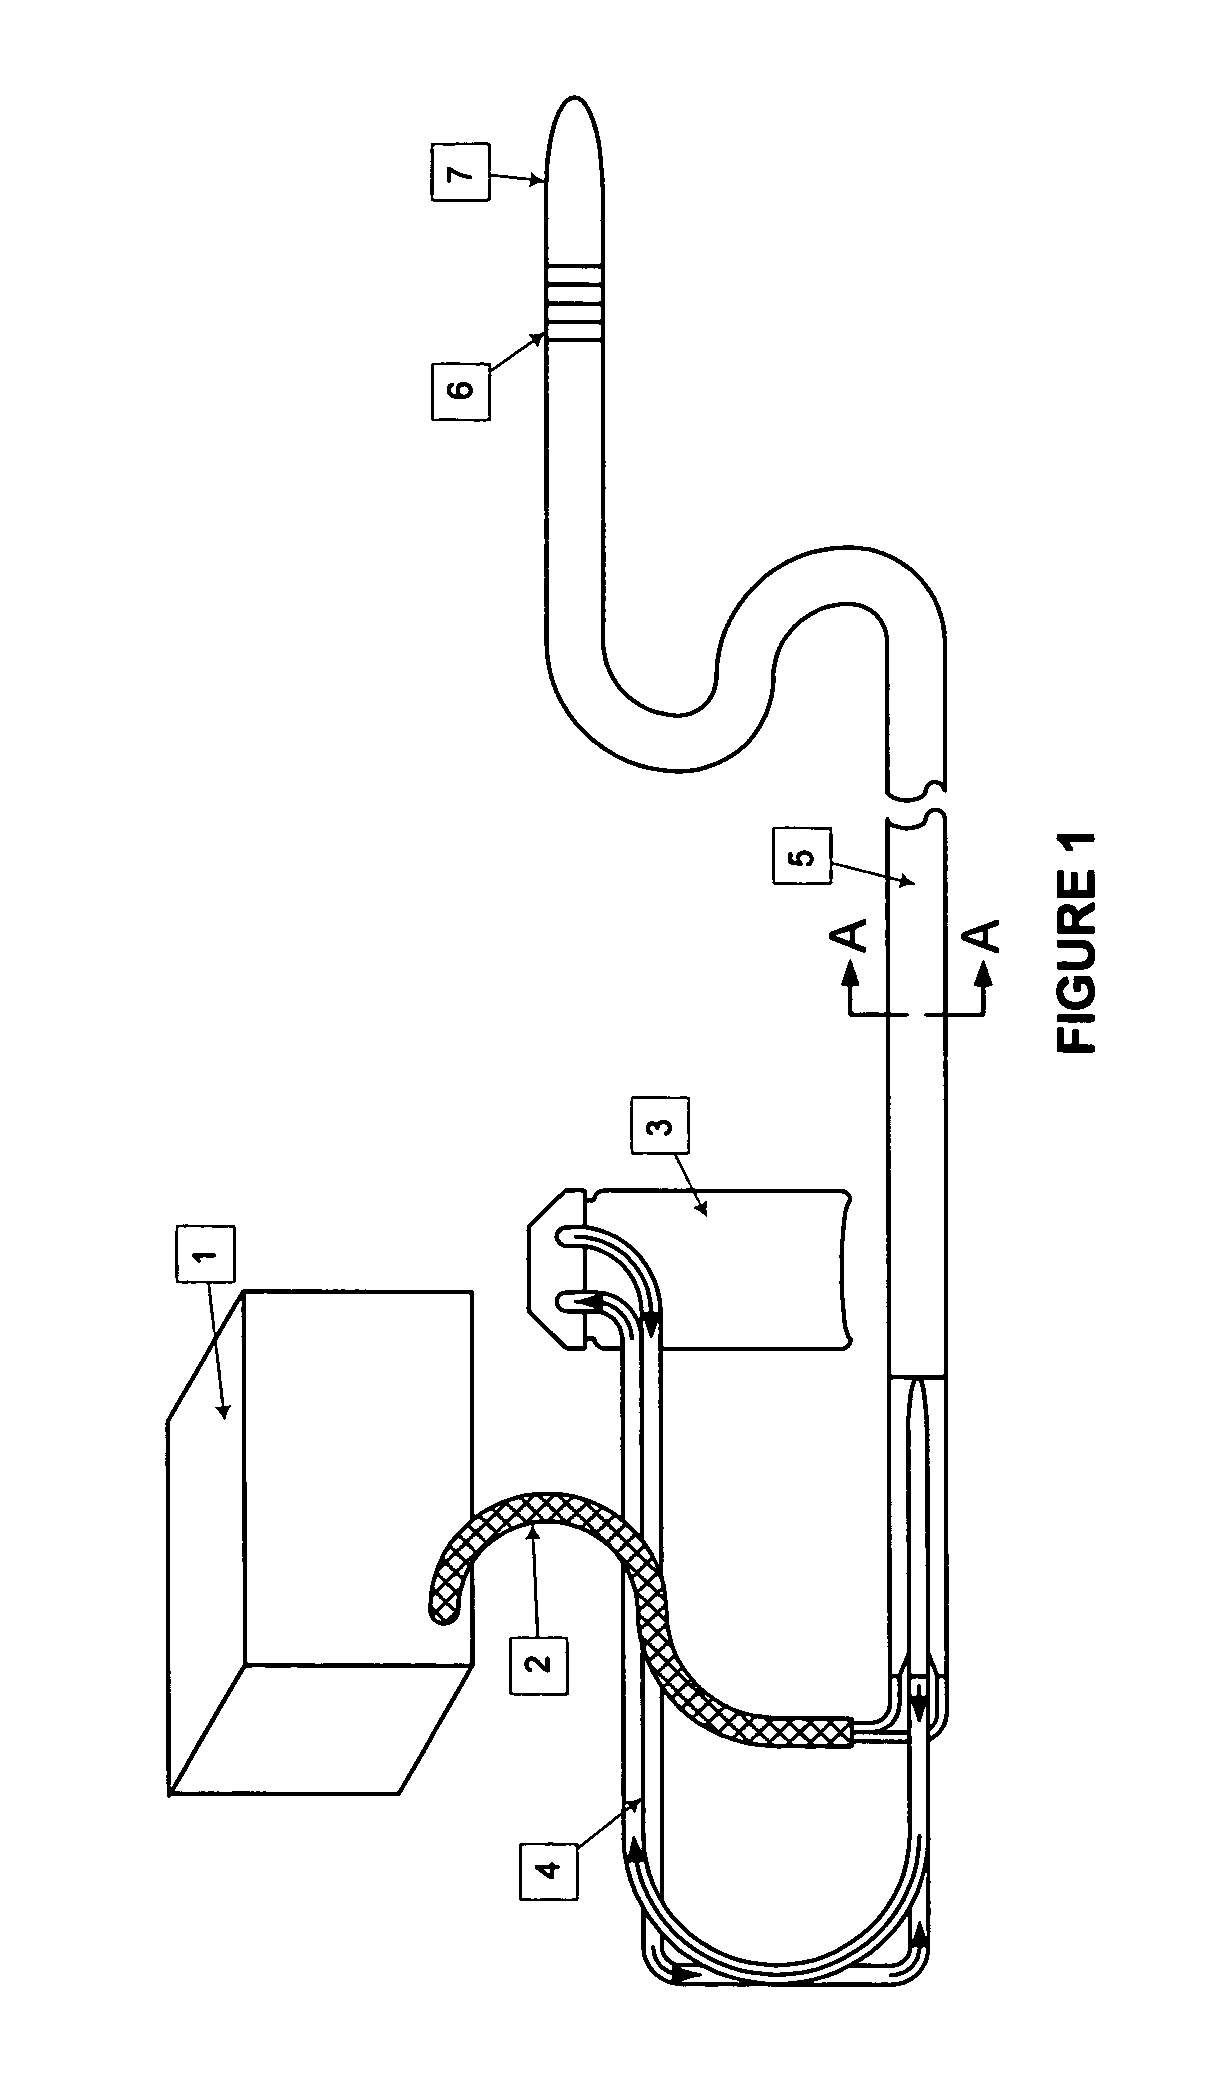 Method and apparatus for treating vascular obstructions